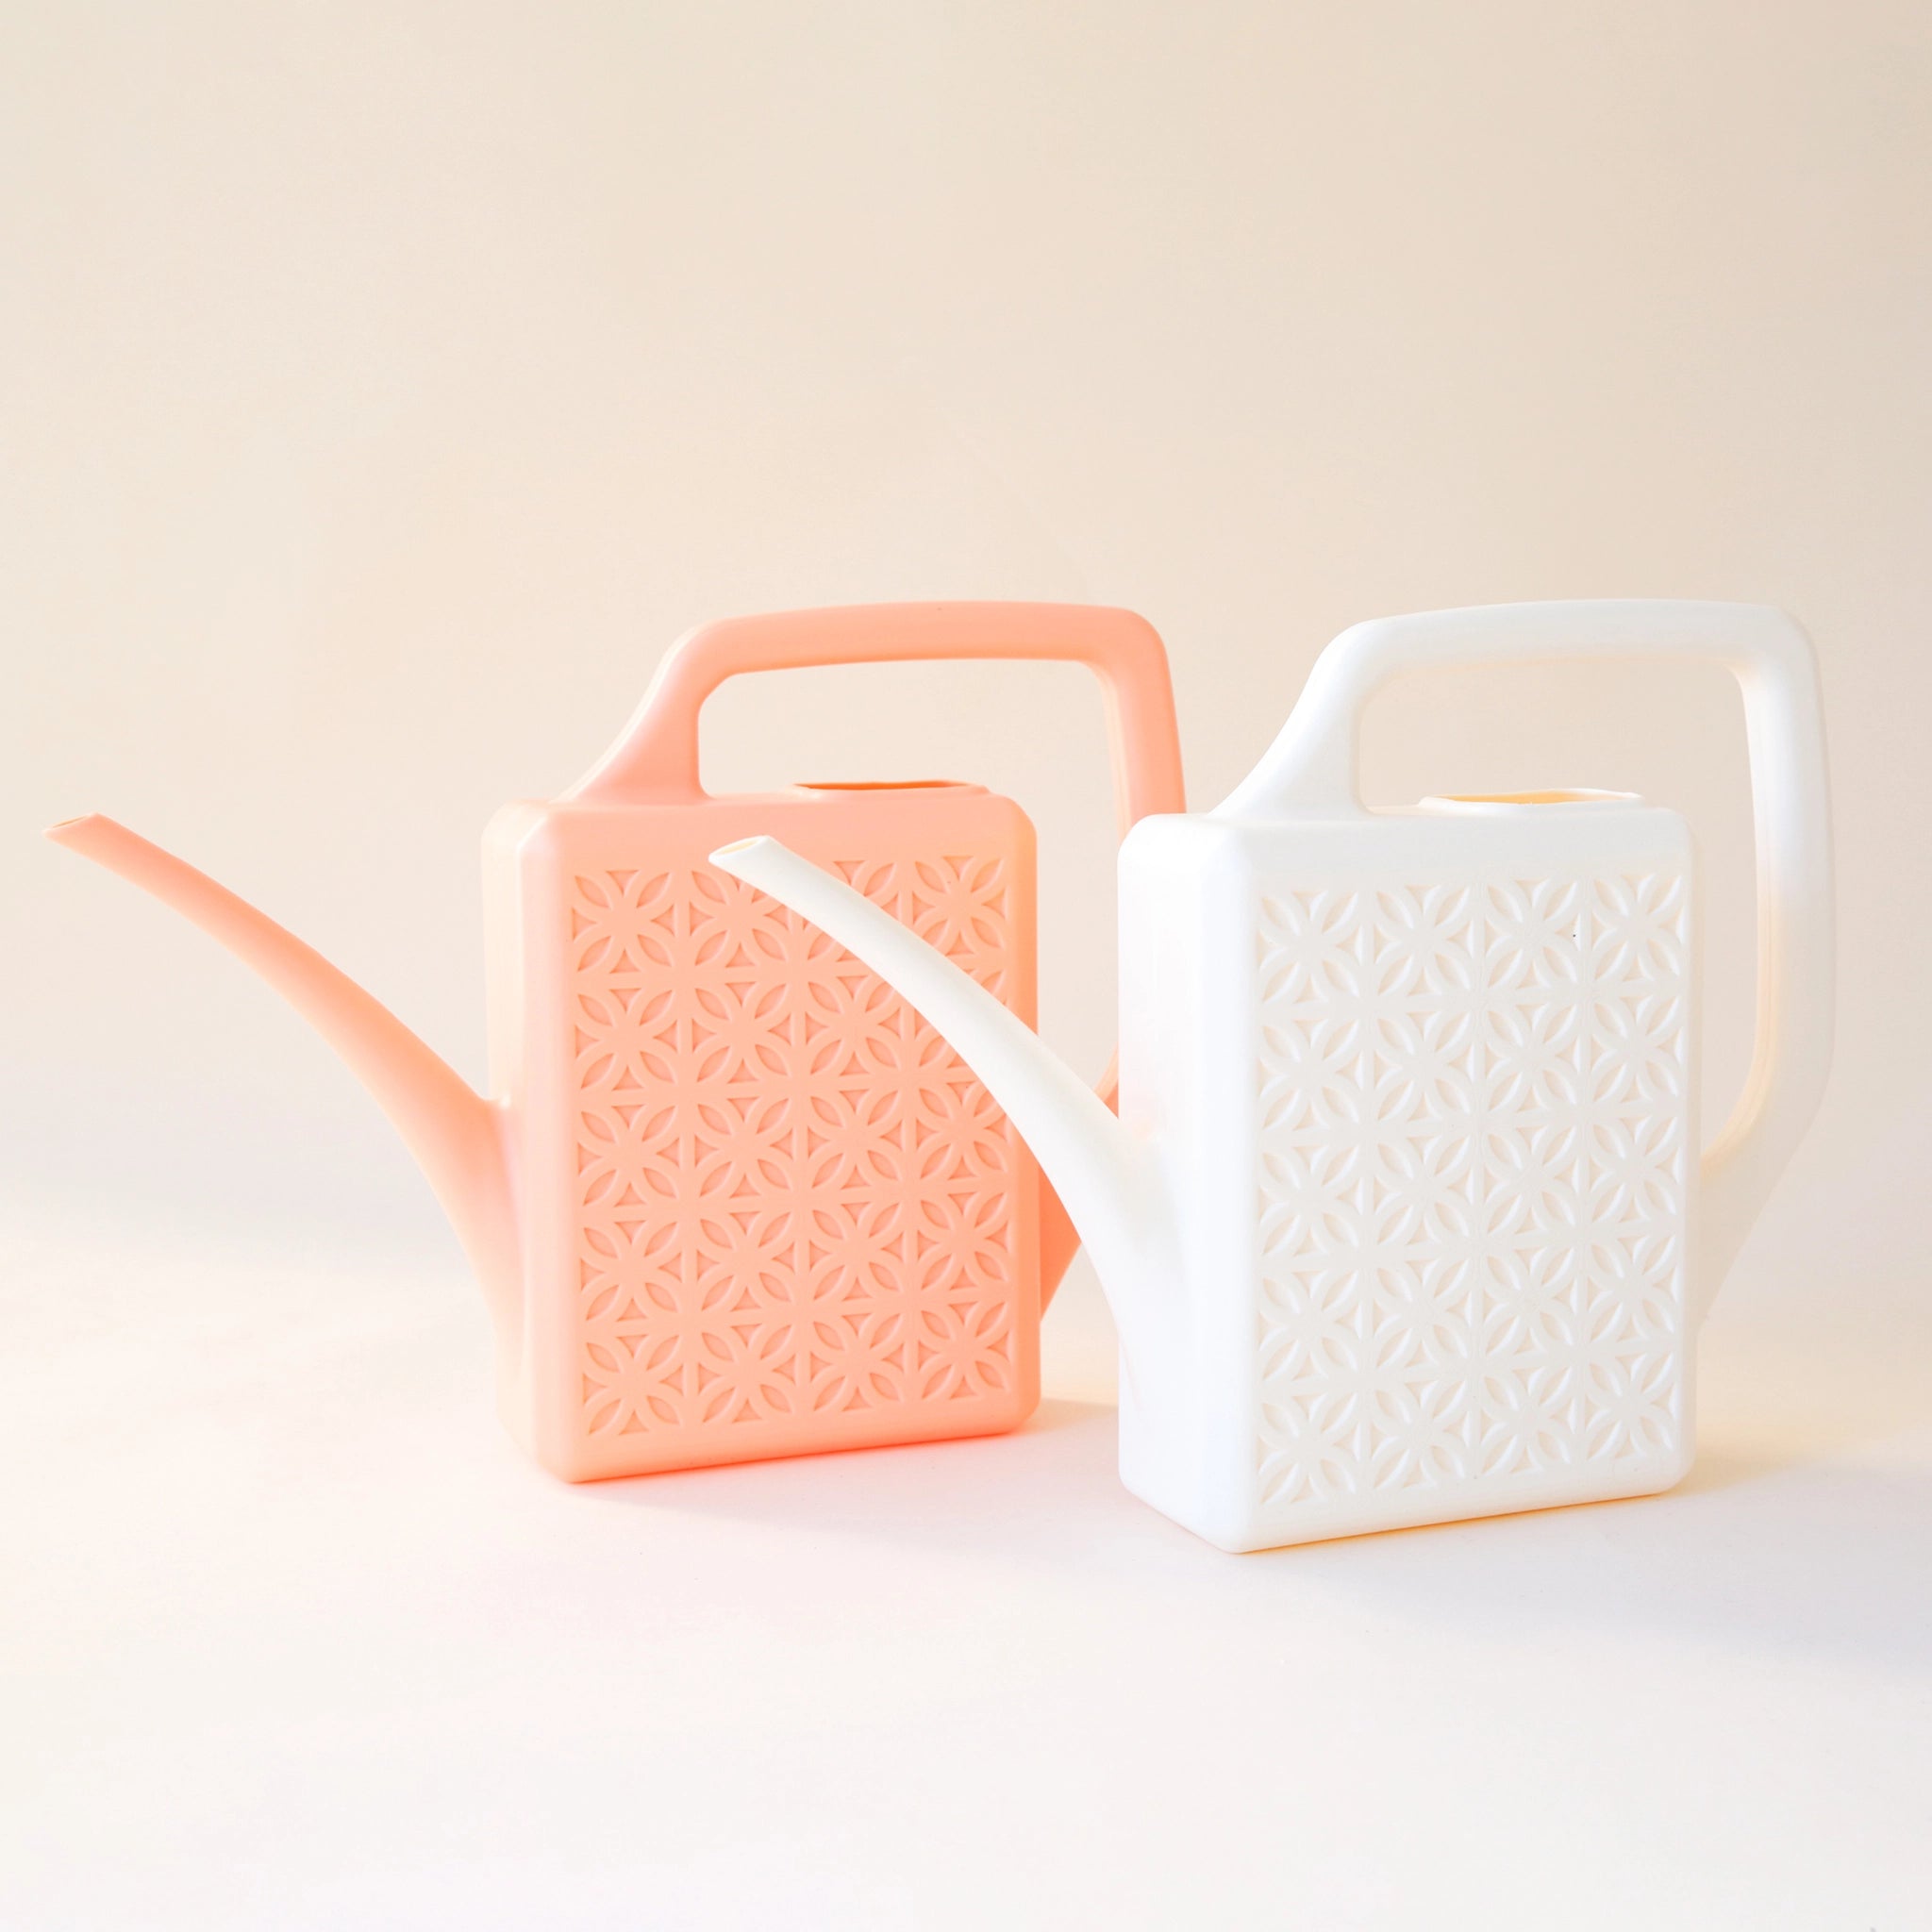 A peach plastic watering can with a narrow spout and square handle and a rectangle breeze block design on the sides.